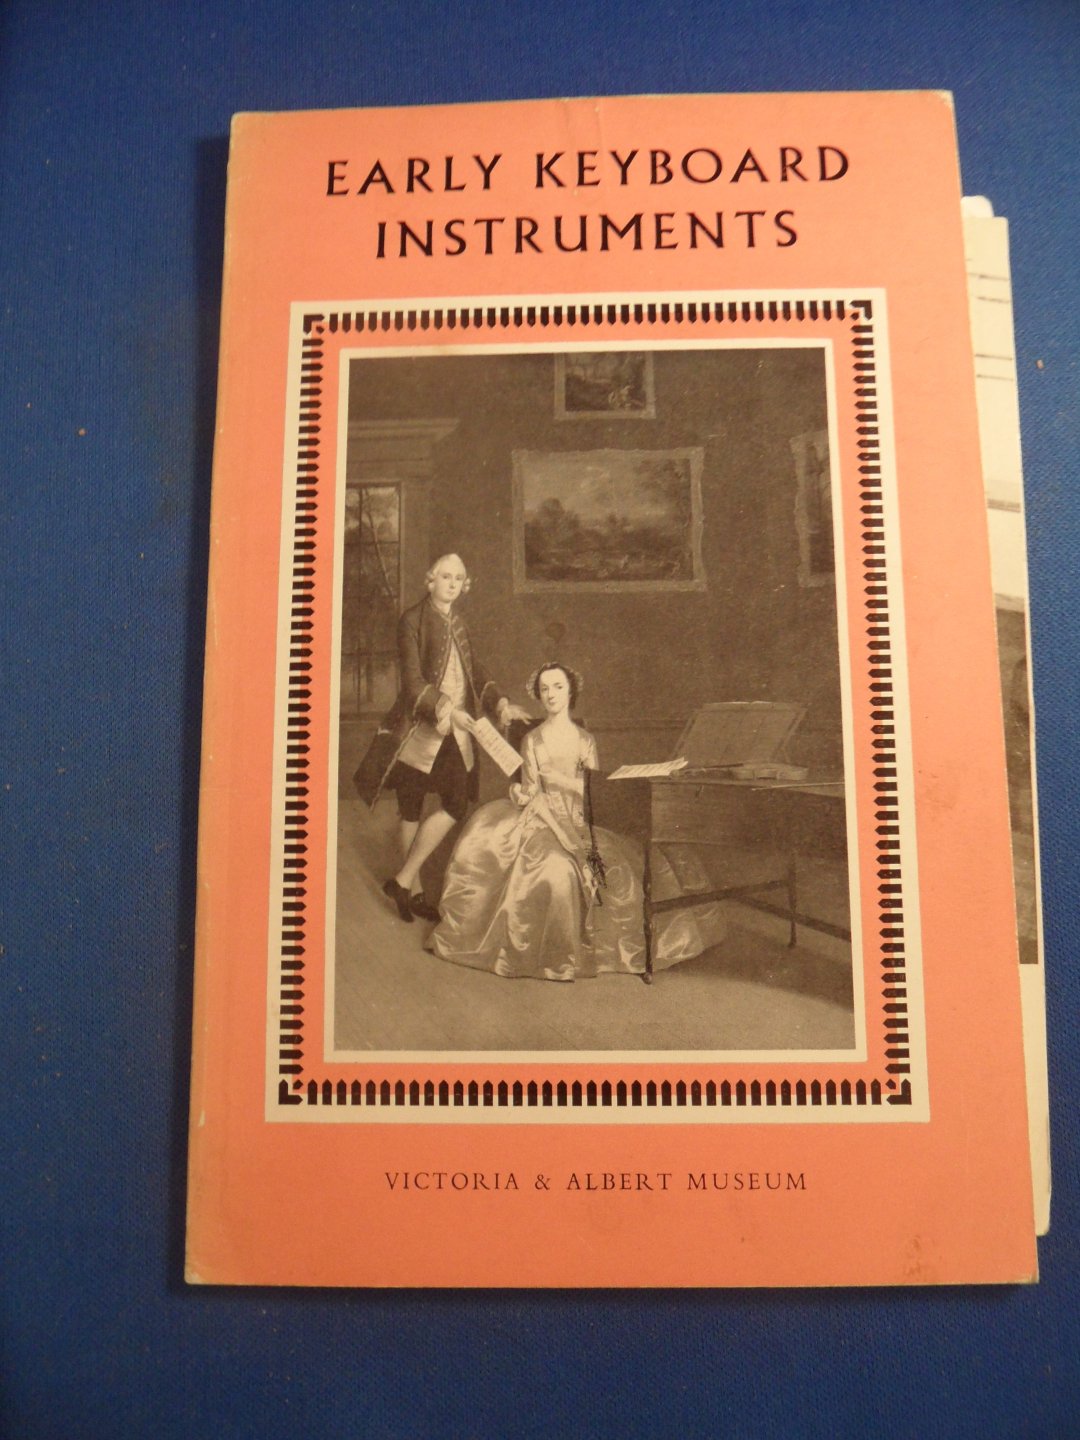 Russell, Raymond - Early Keyboard Instruments, small picture book no. 48